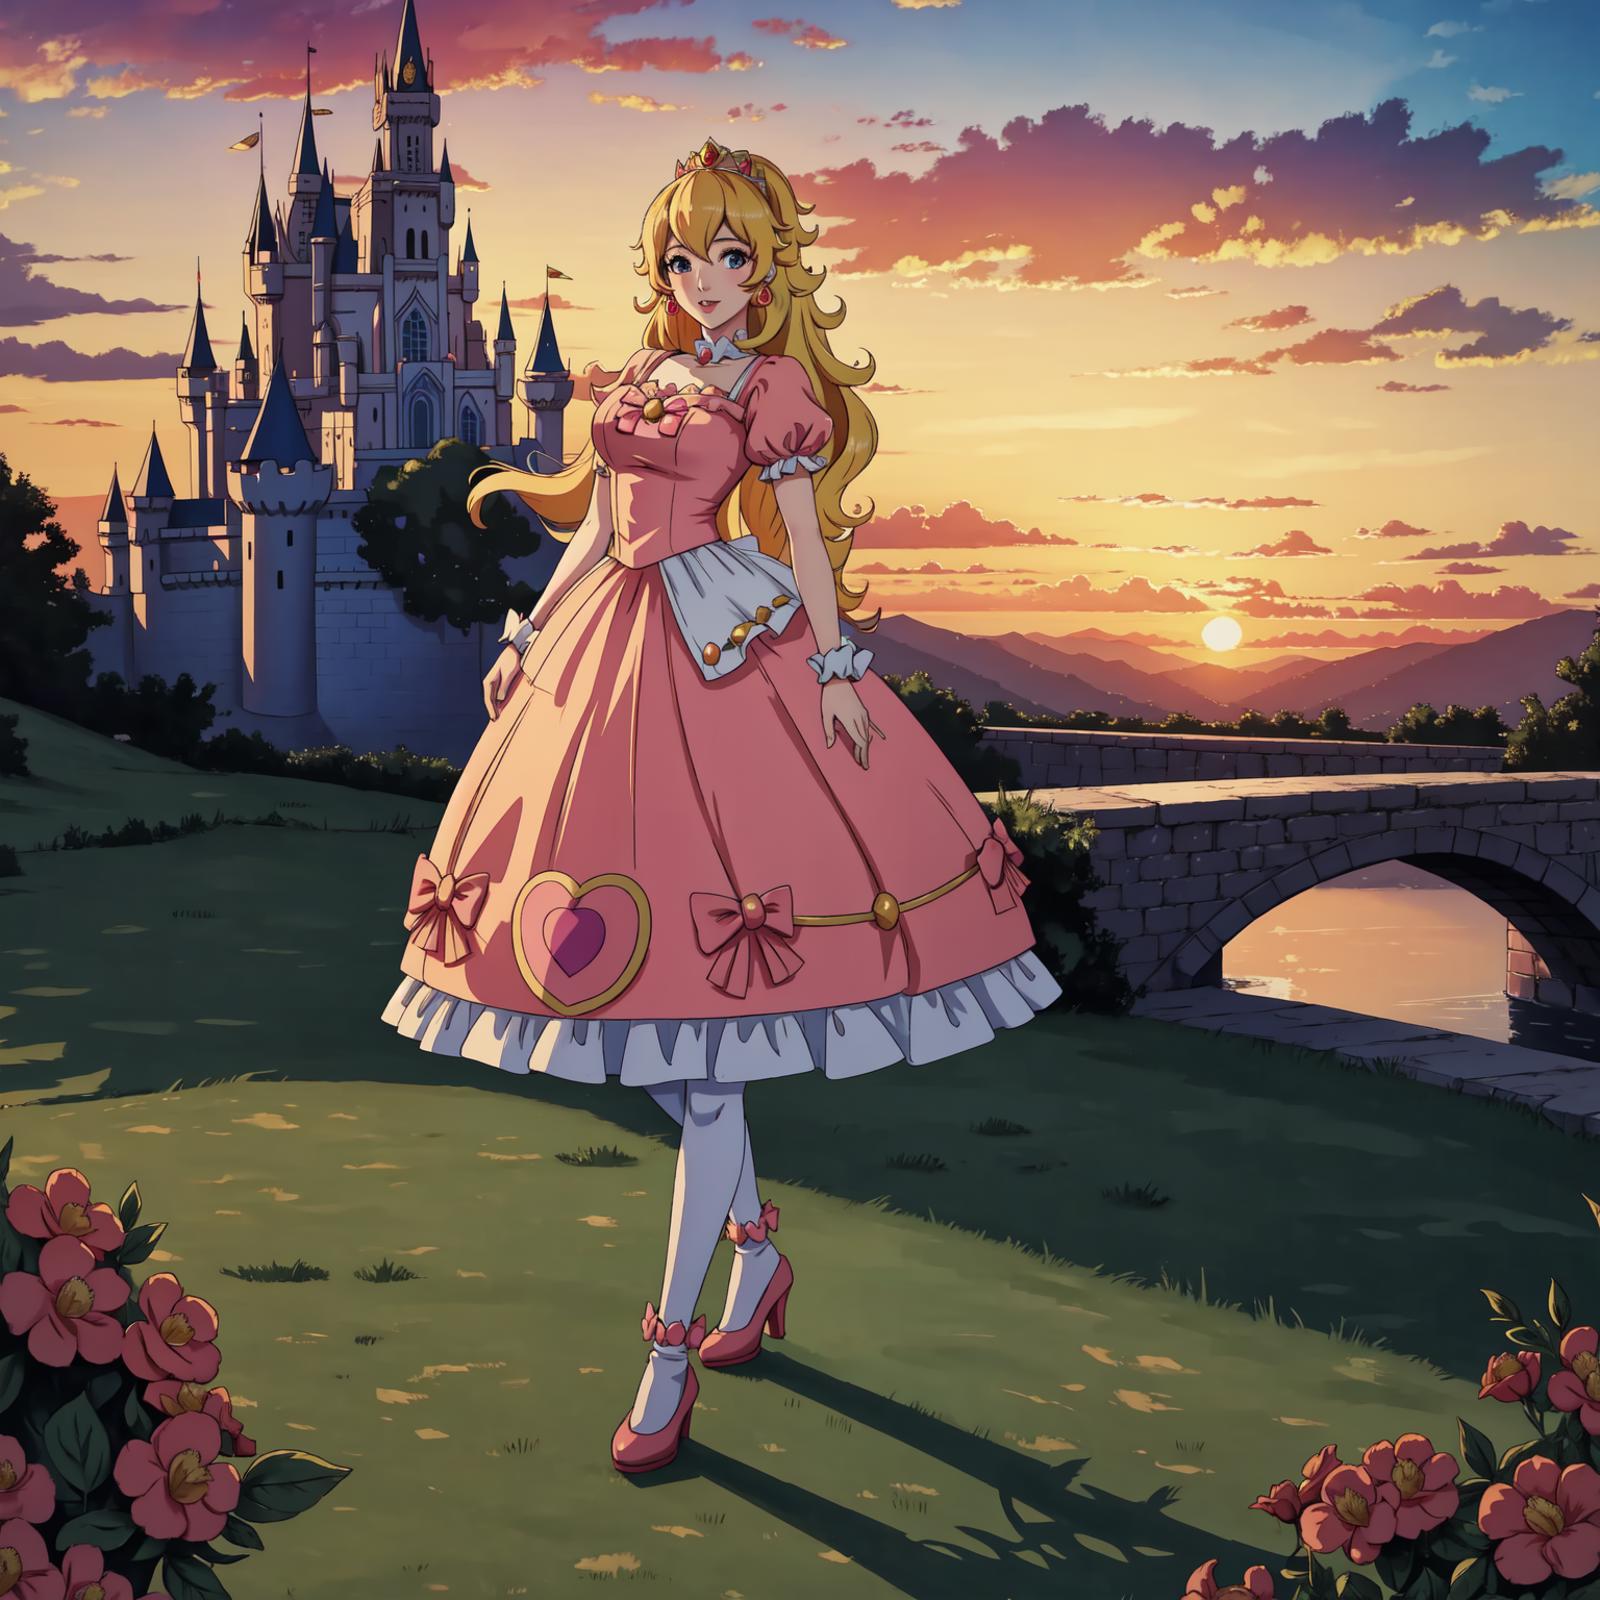 A Princess Dressed in Pink with a Castle in the Background